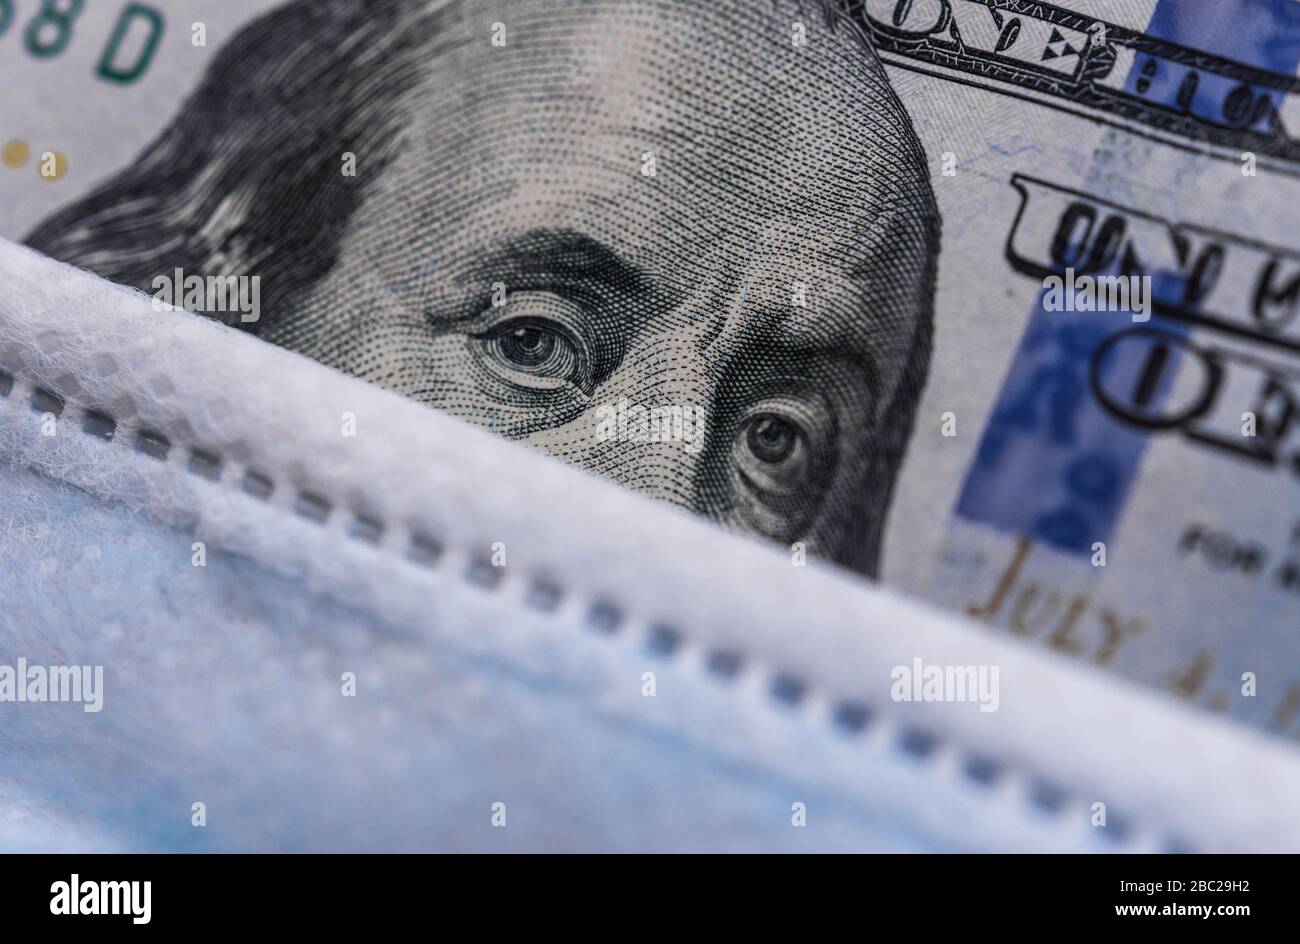 100 US dollars bill with a face mask against coronavirus covid-19 pandemic. Stock Photo